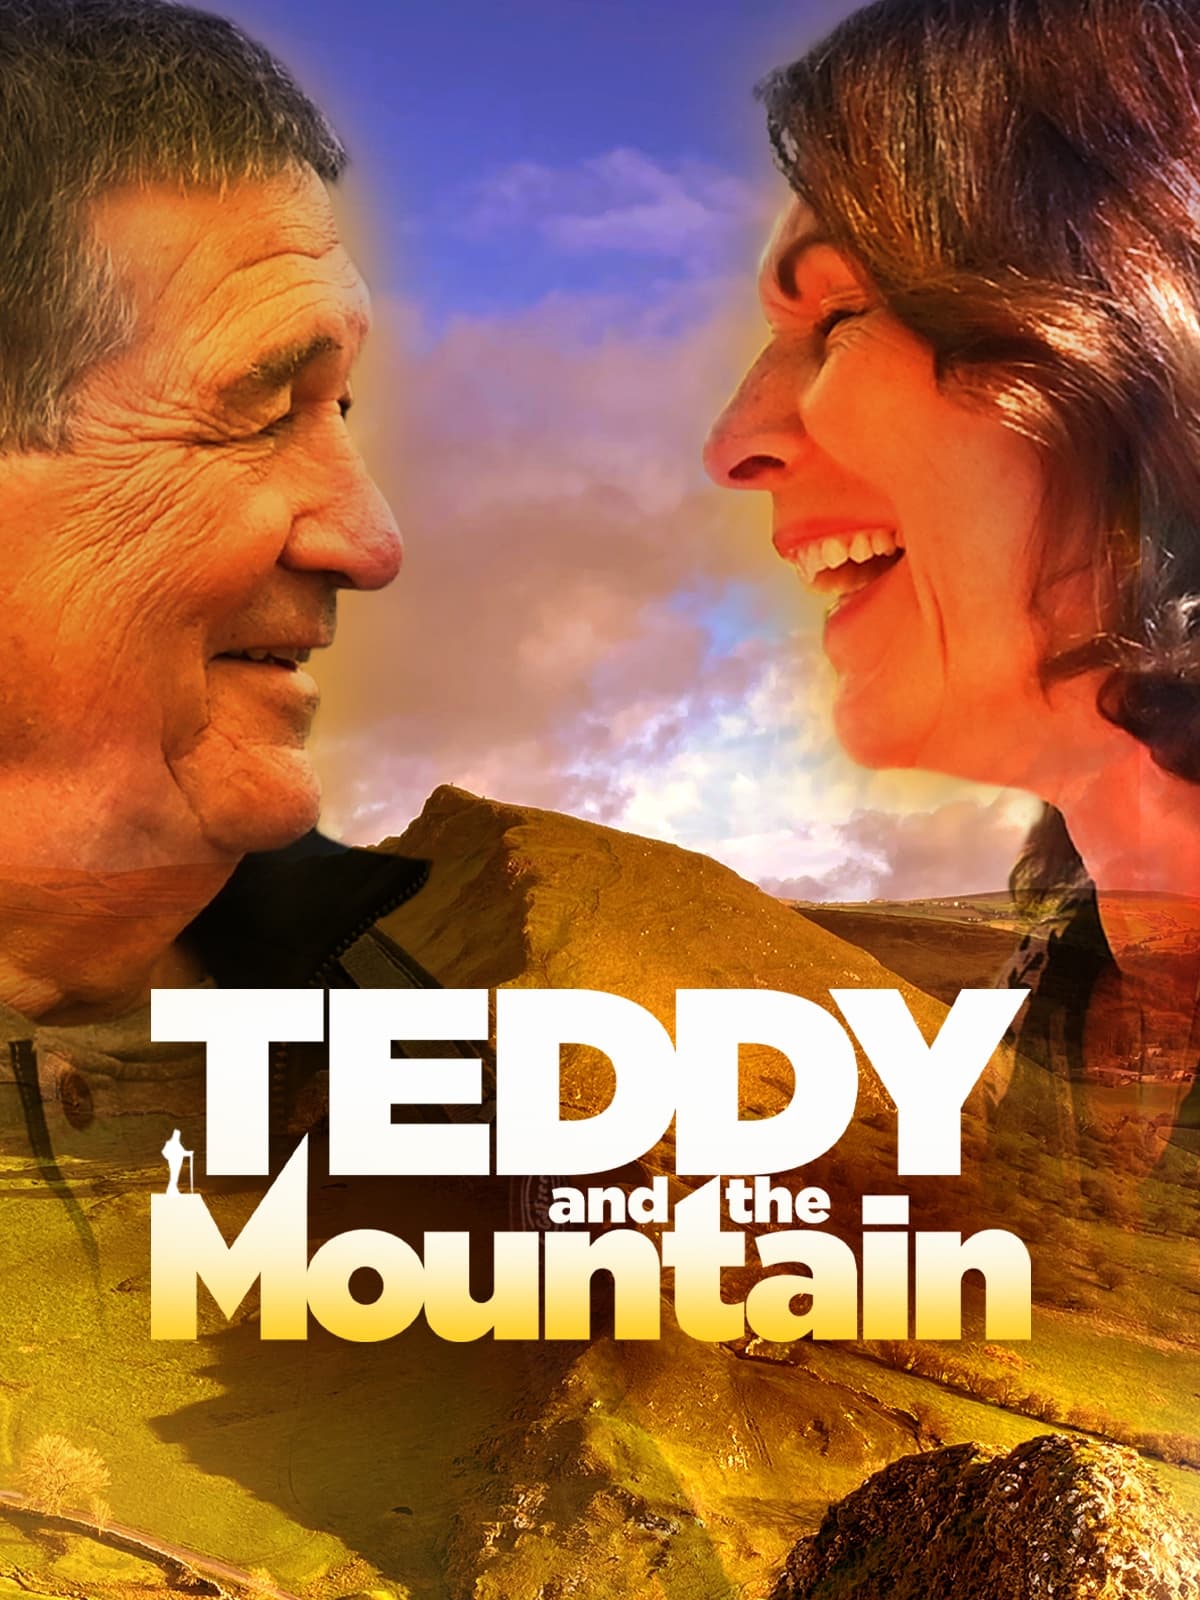 Teddy and the Mountain